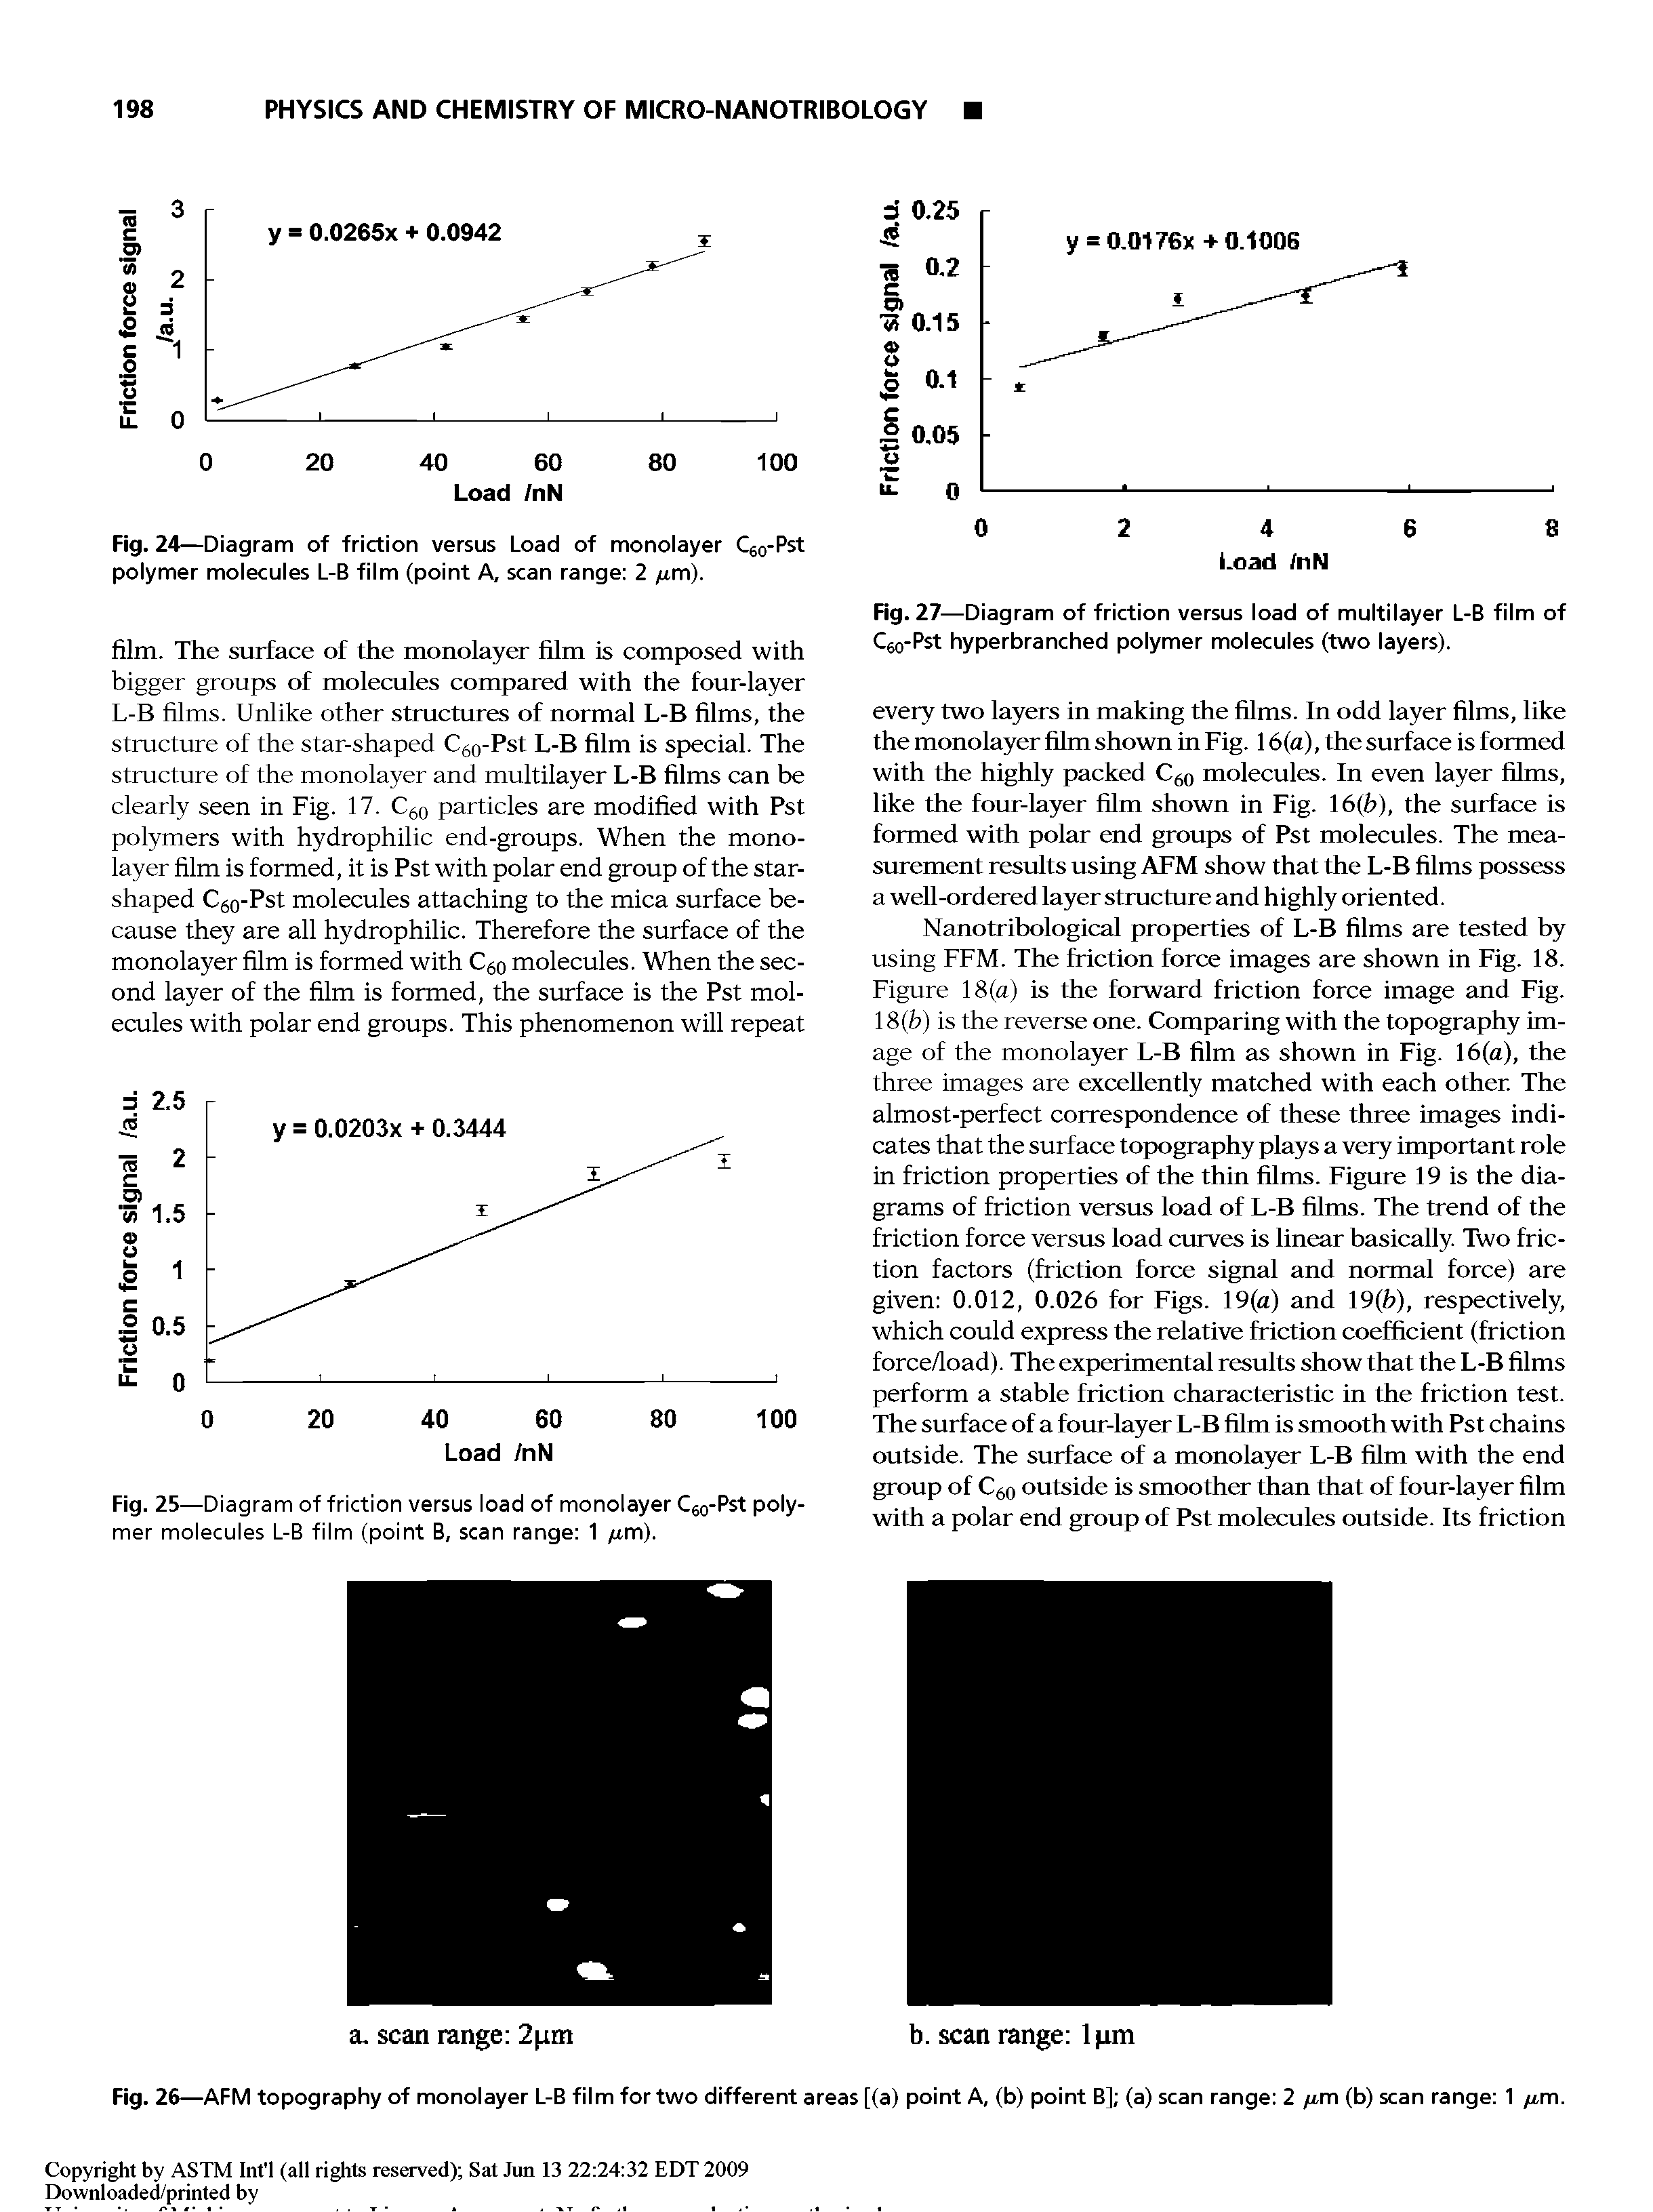 Fig. 25—Diagram of friction versus load of monolayer Cjo-Pst polymer molecules L-B film (point B, scan range 1 /irm).